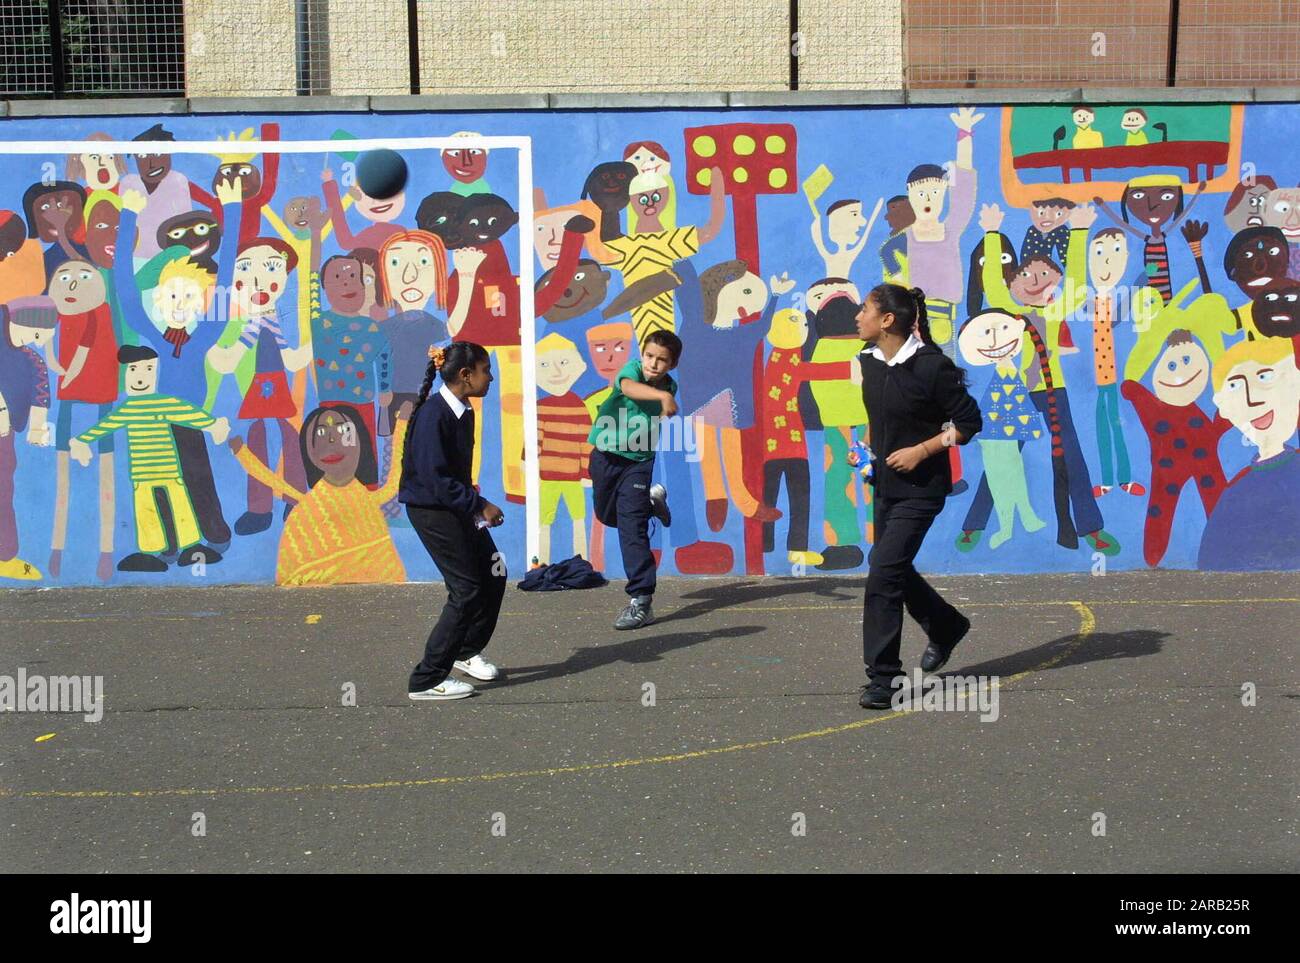 Secondary school playground with bright wall mural painted by the students showing Asian kids in uniform playing Stock Photo